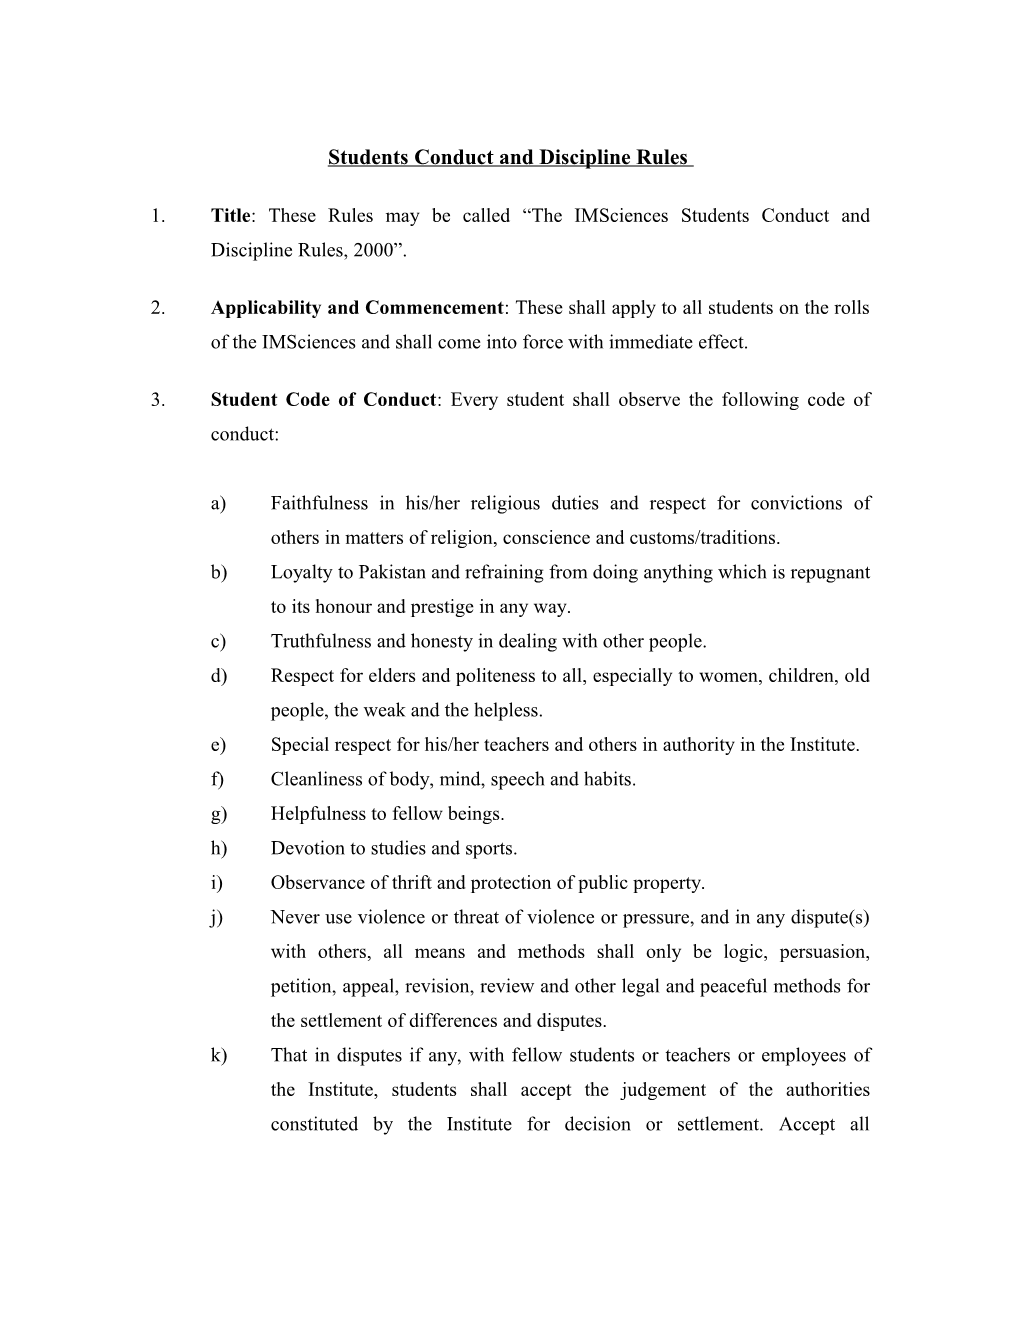 Student Conduct and Discipline Regulations 1999